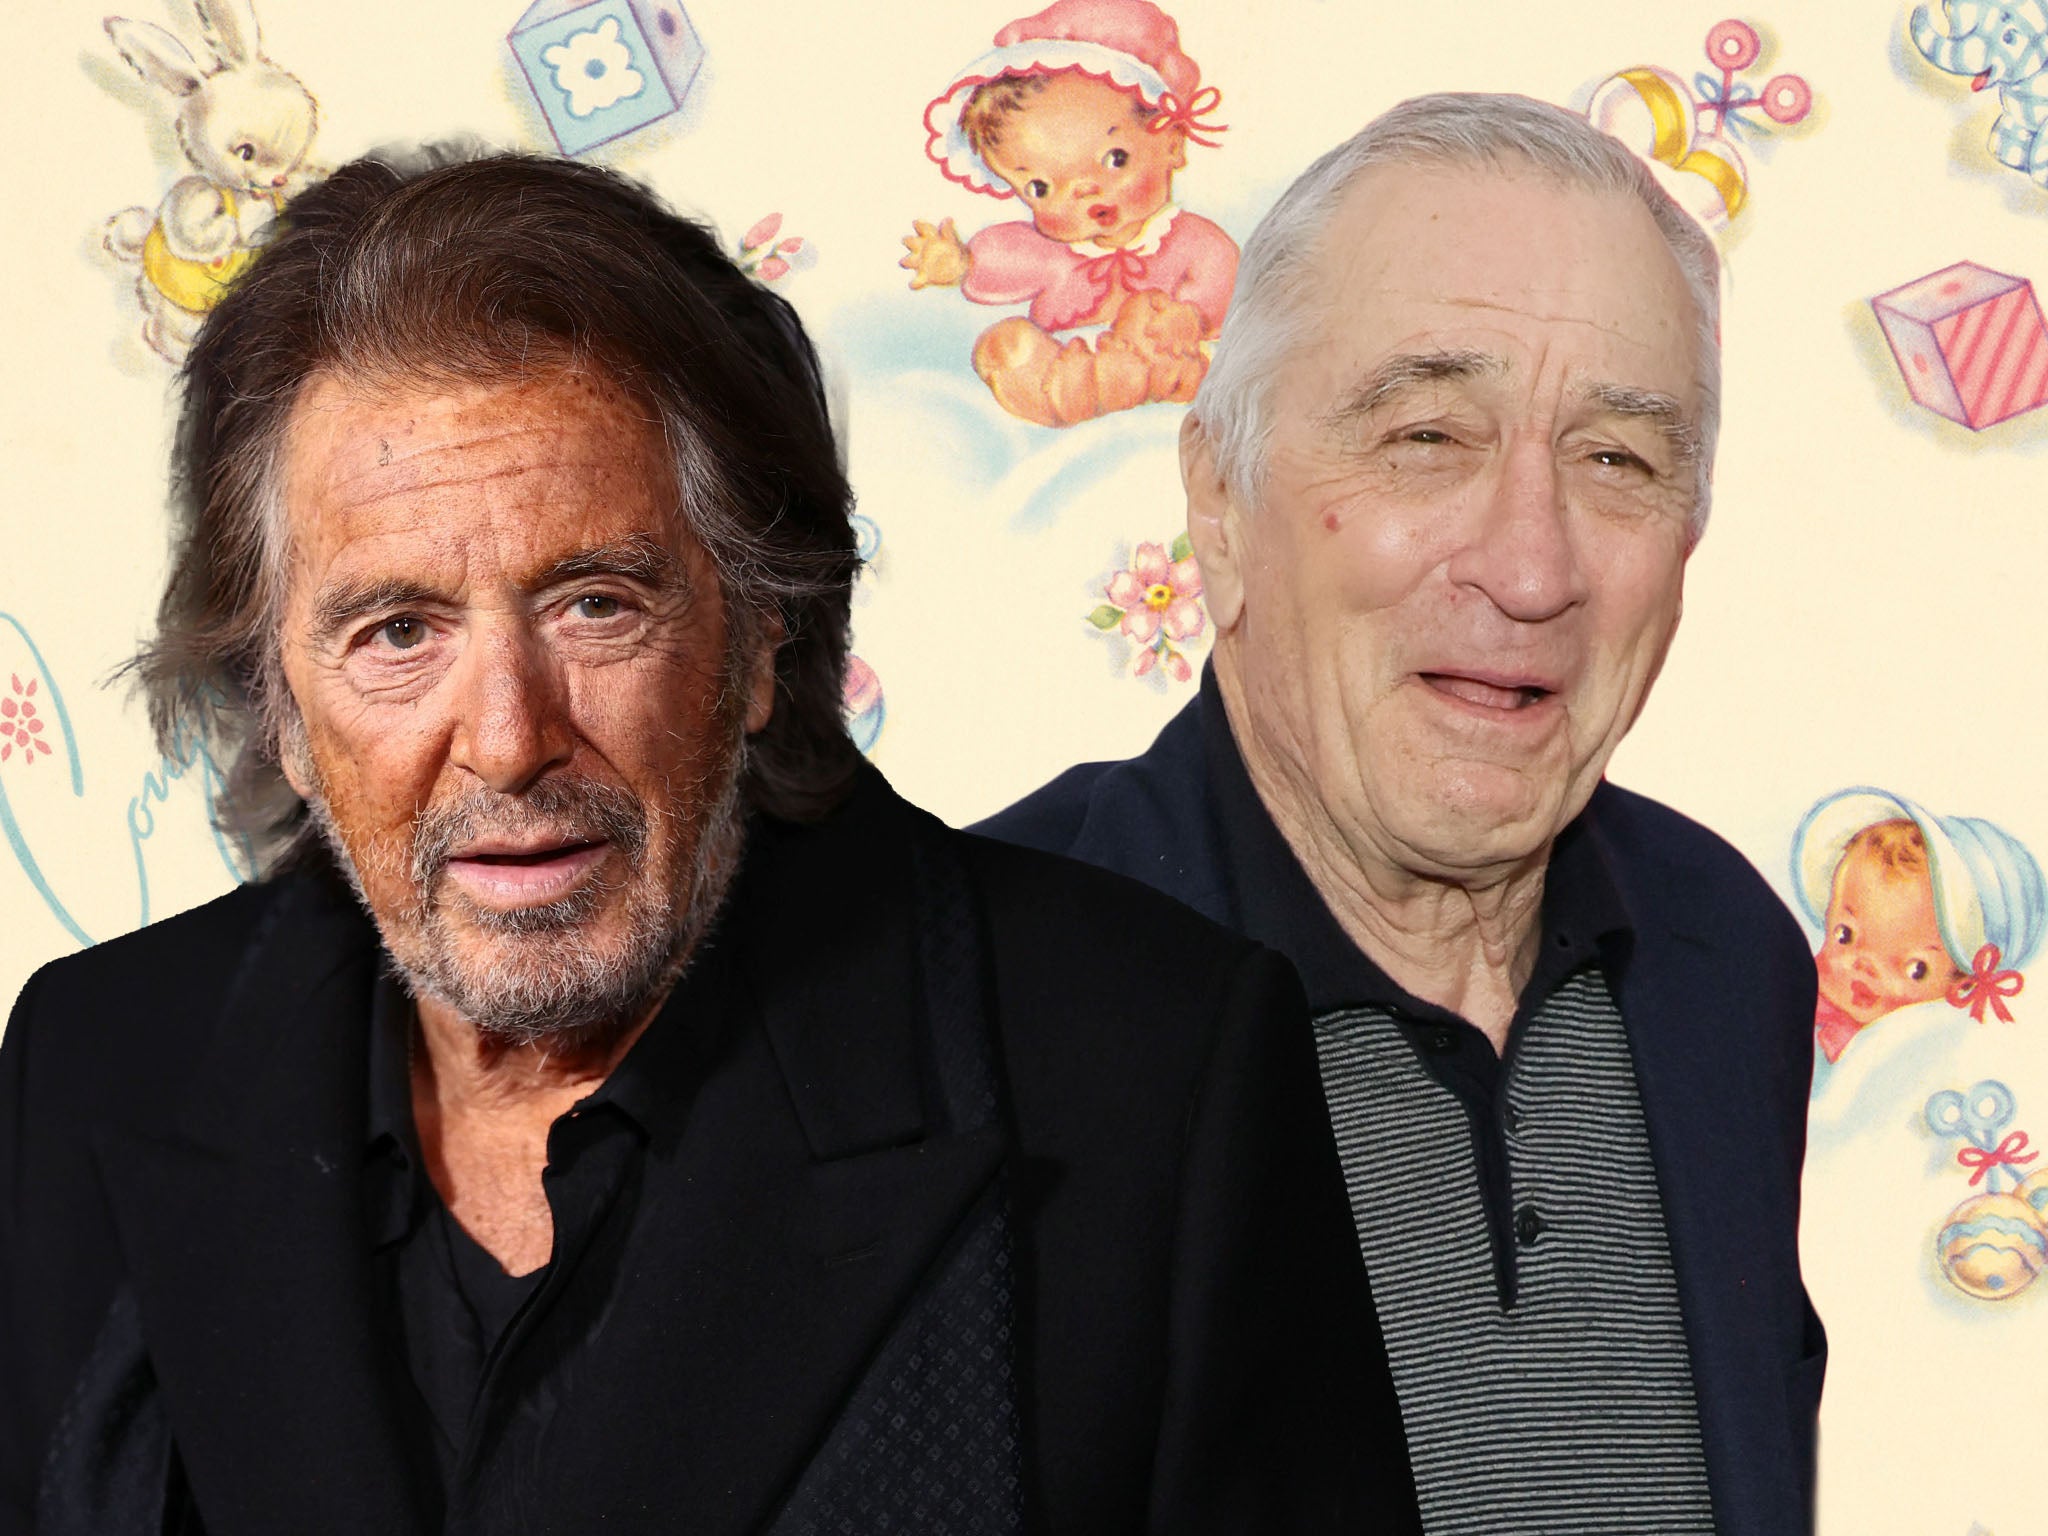 Al Pacino, 83, and Robert De Niro, 79, who have both become new fathers in recent weeks